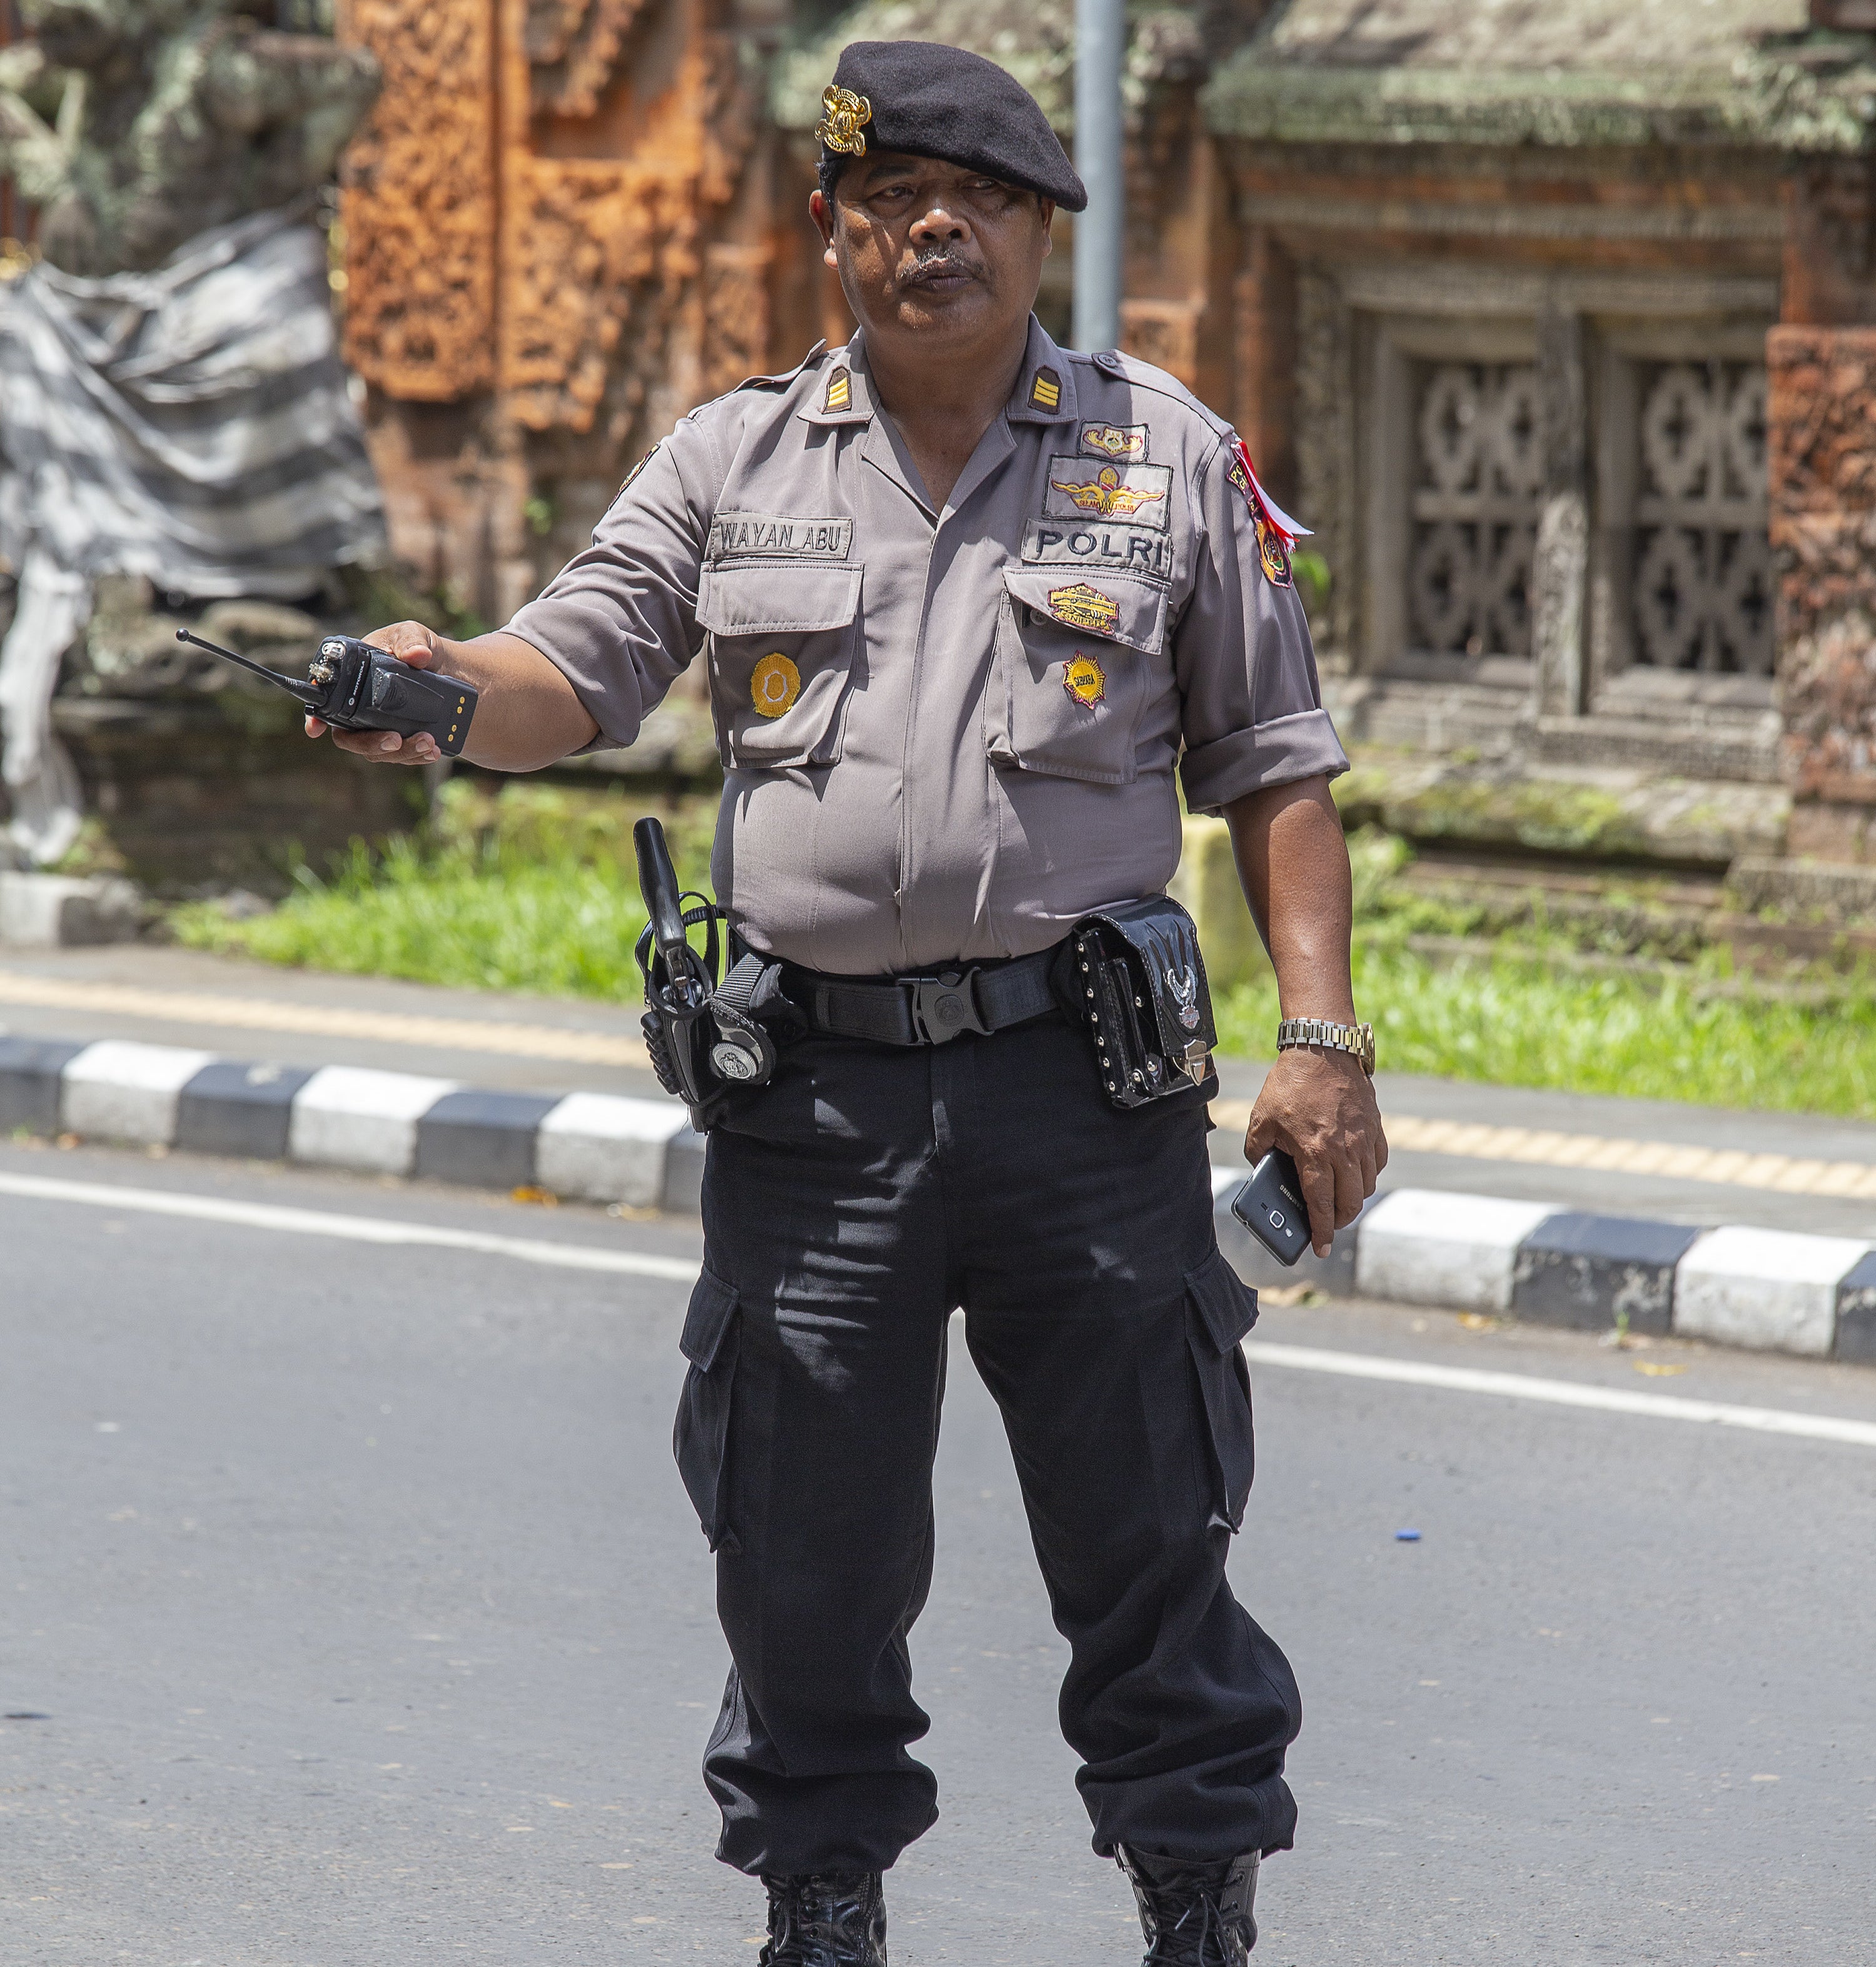 A Balinese police officer standing in the street